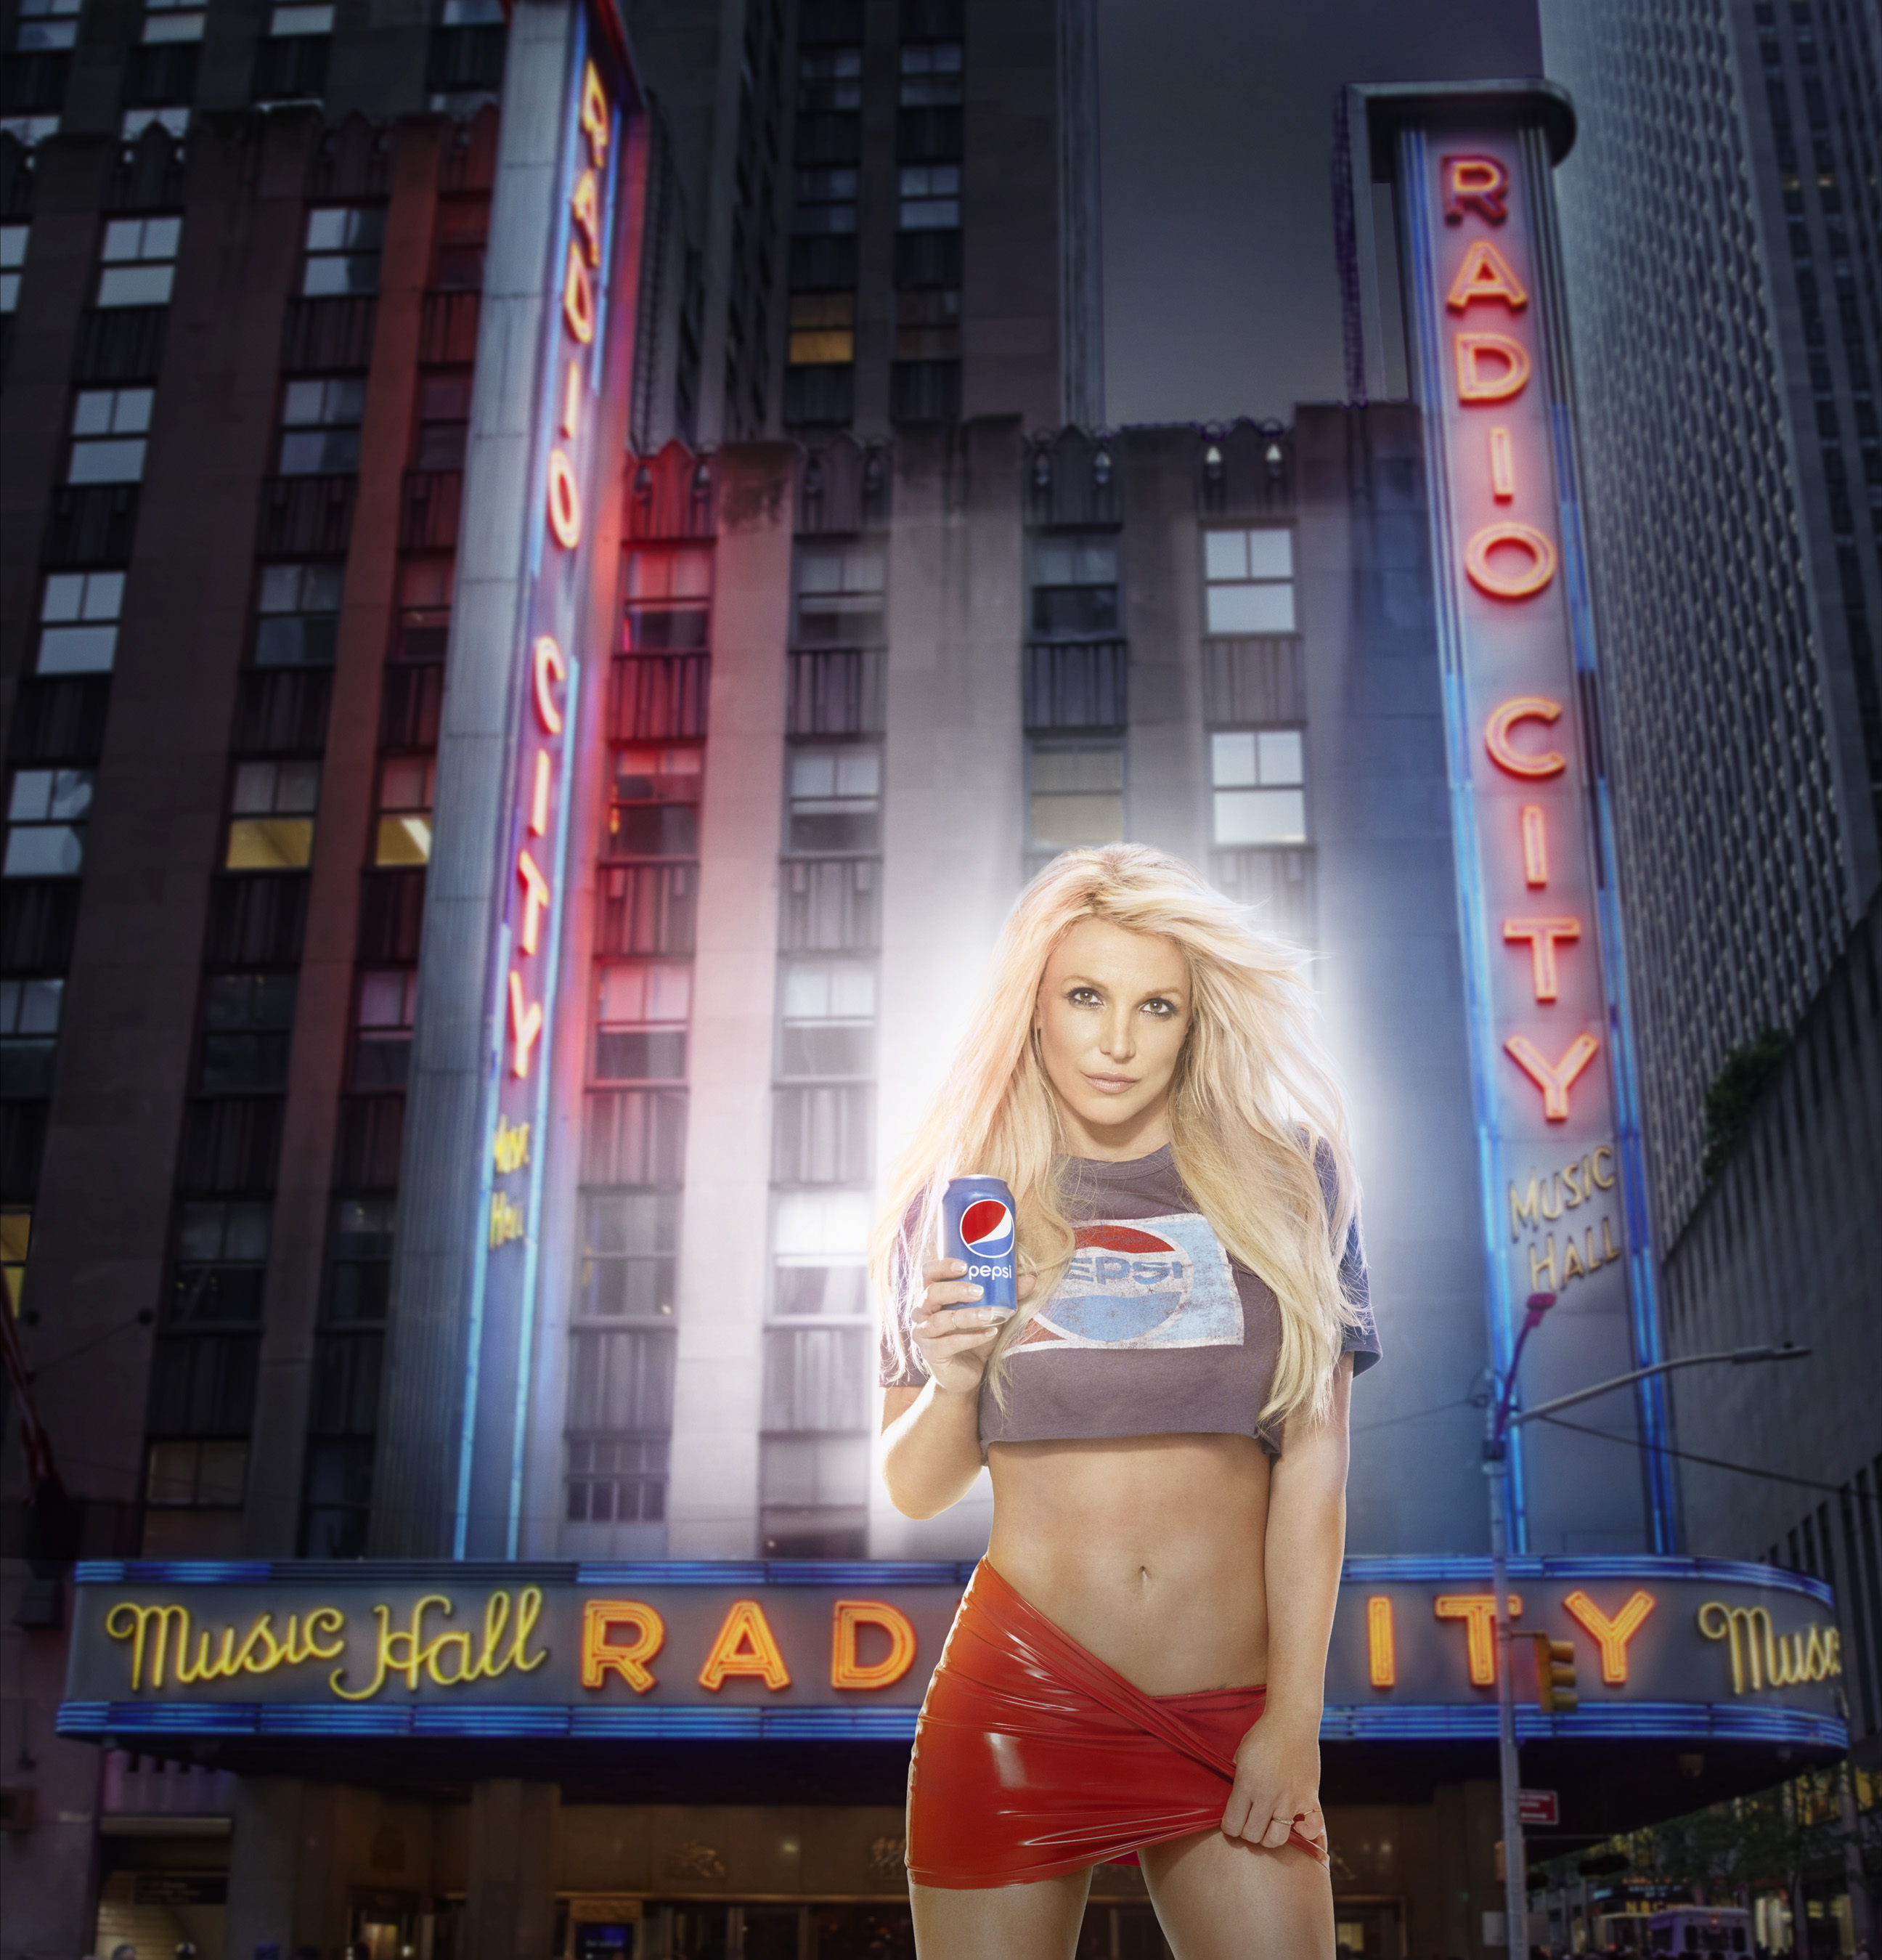 In honor of the historic partnership announcement between The Madison Square Garden Company and PepsiCo, longtime Pepsi musical artist Britney Spears pictured here in front of Radio City Music Hall.